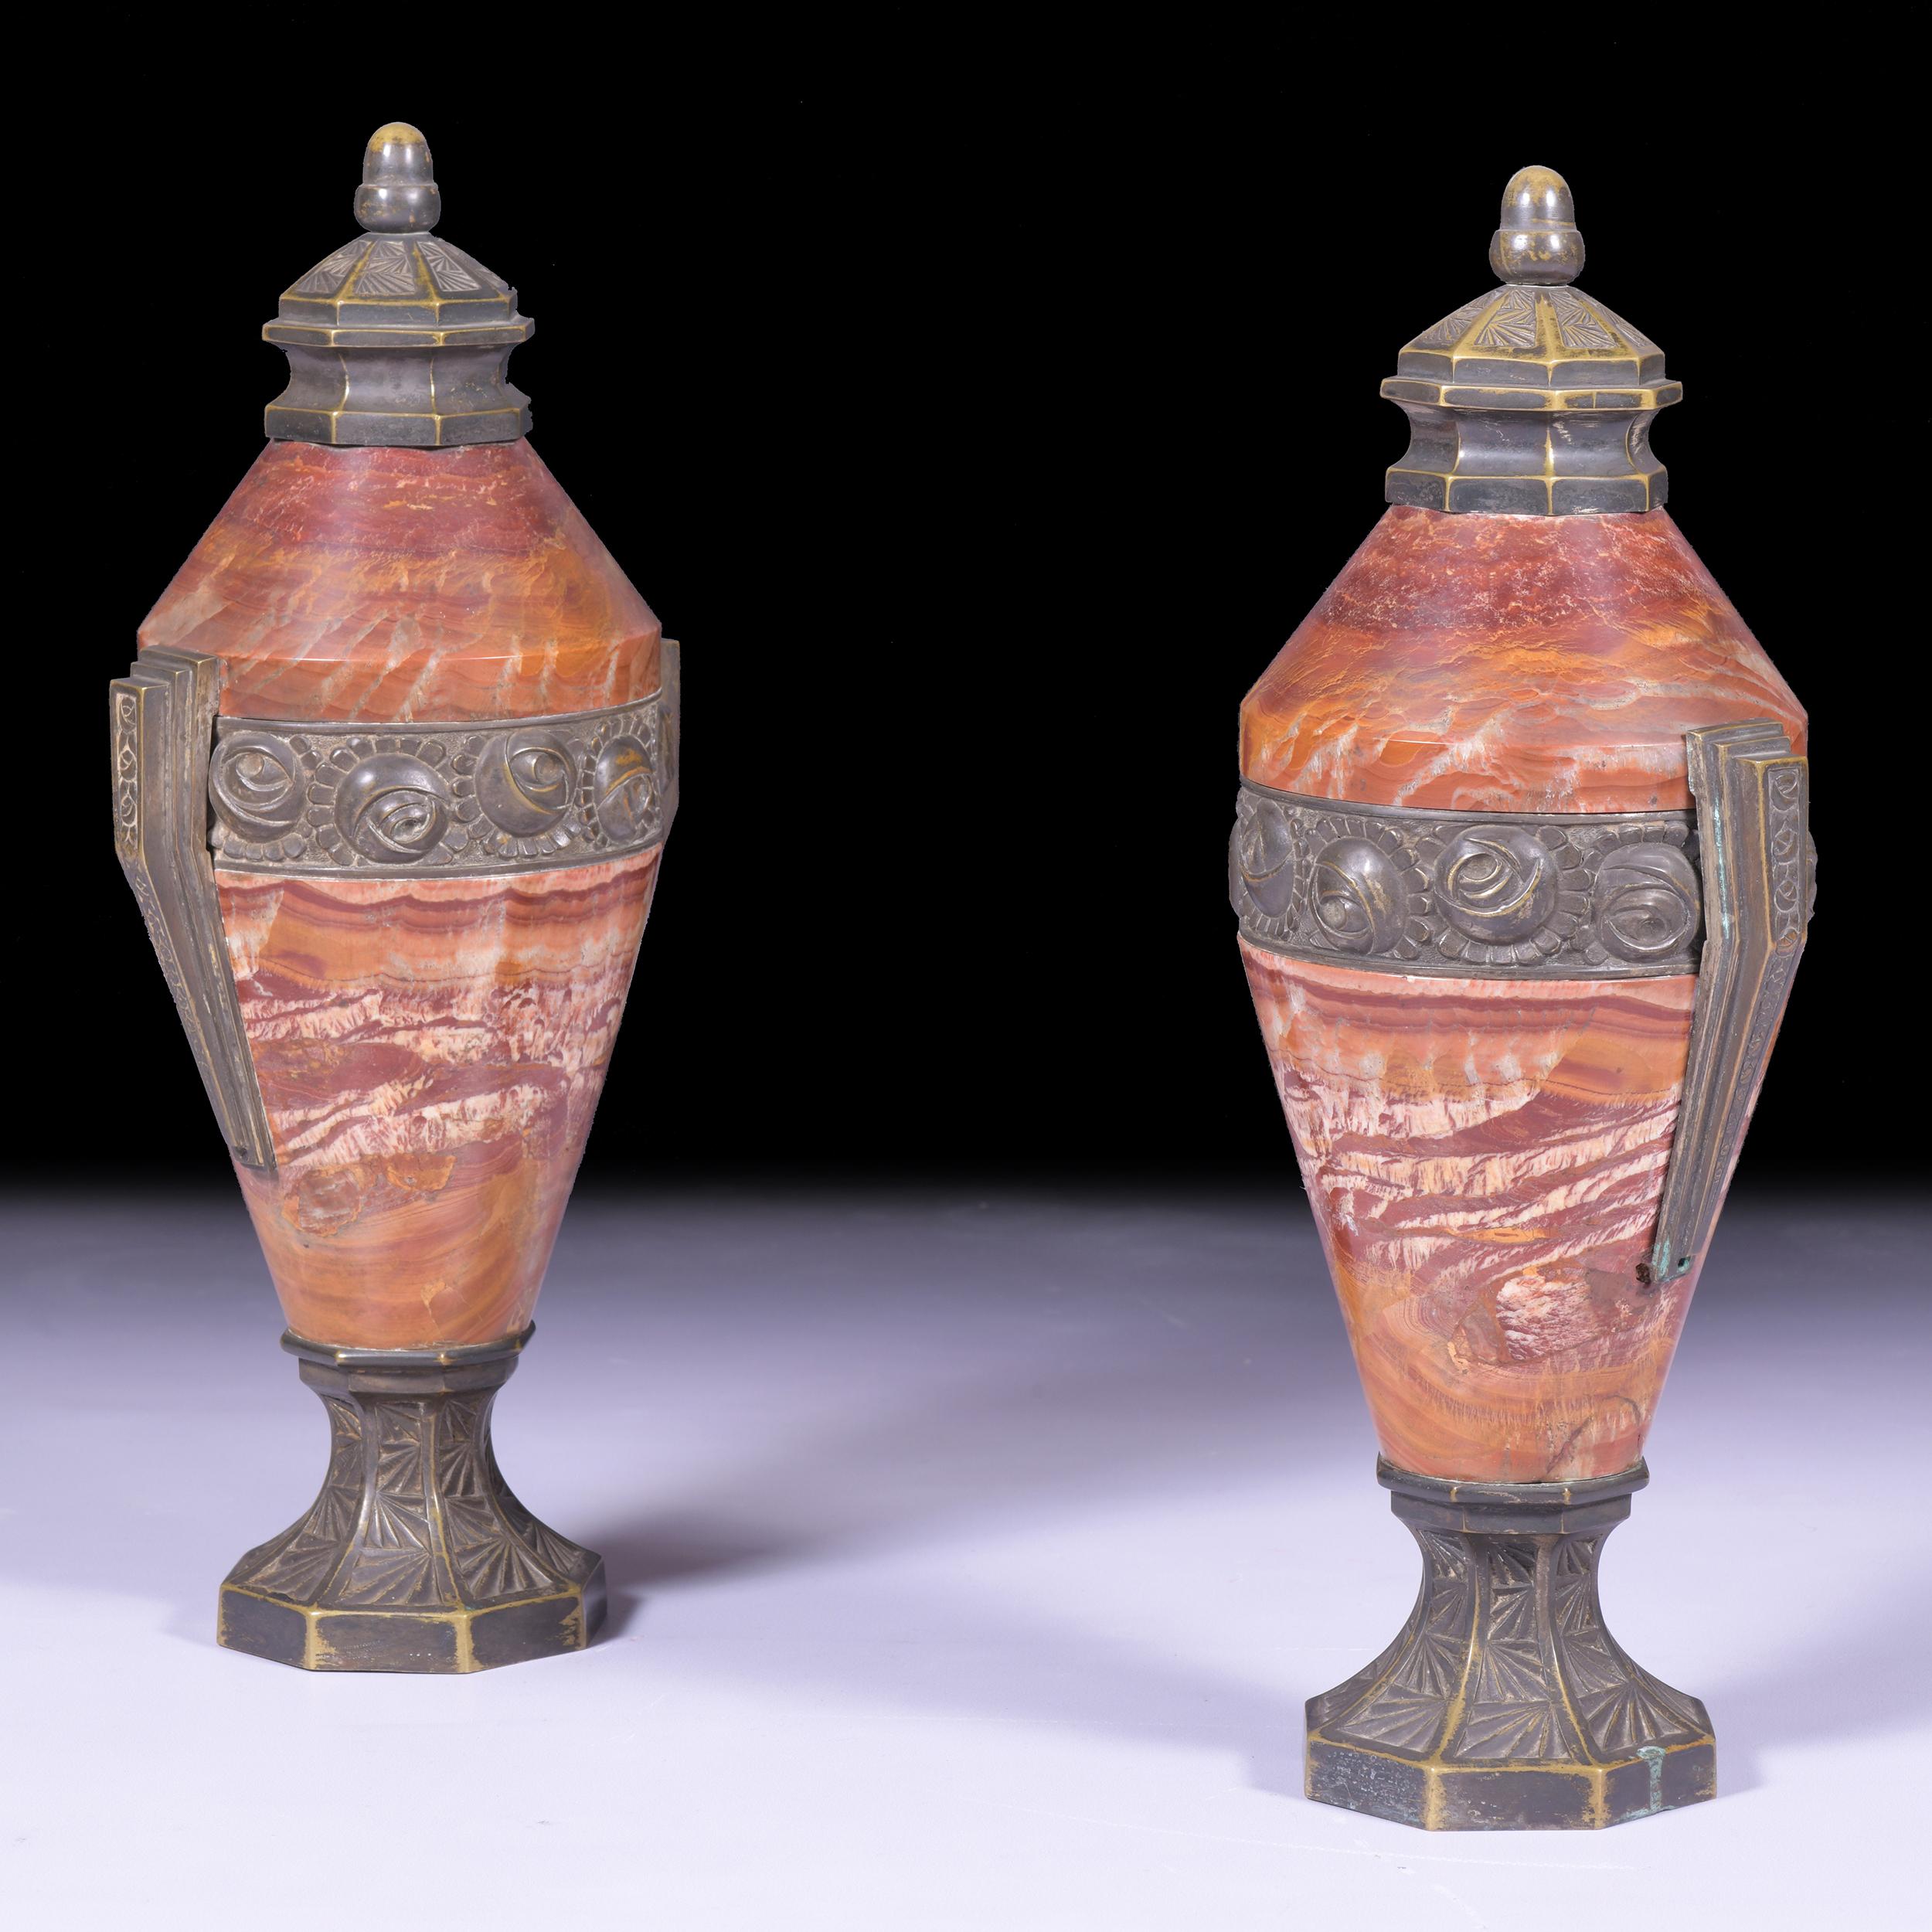 A very fine quality pair of marble and bronze Art Deco Urns

Circa 1930

French

Located In Dublin 8